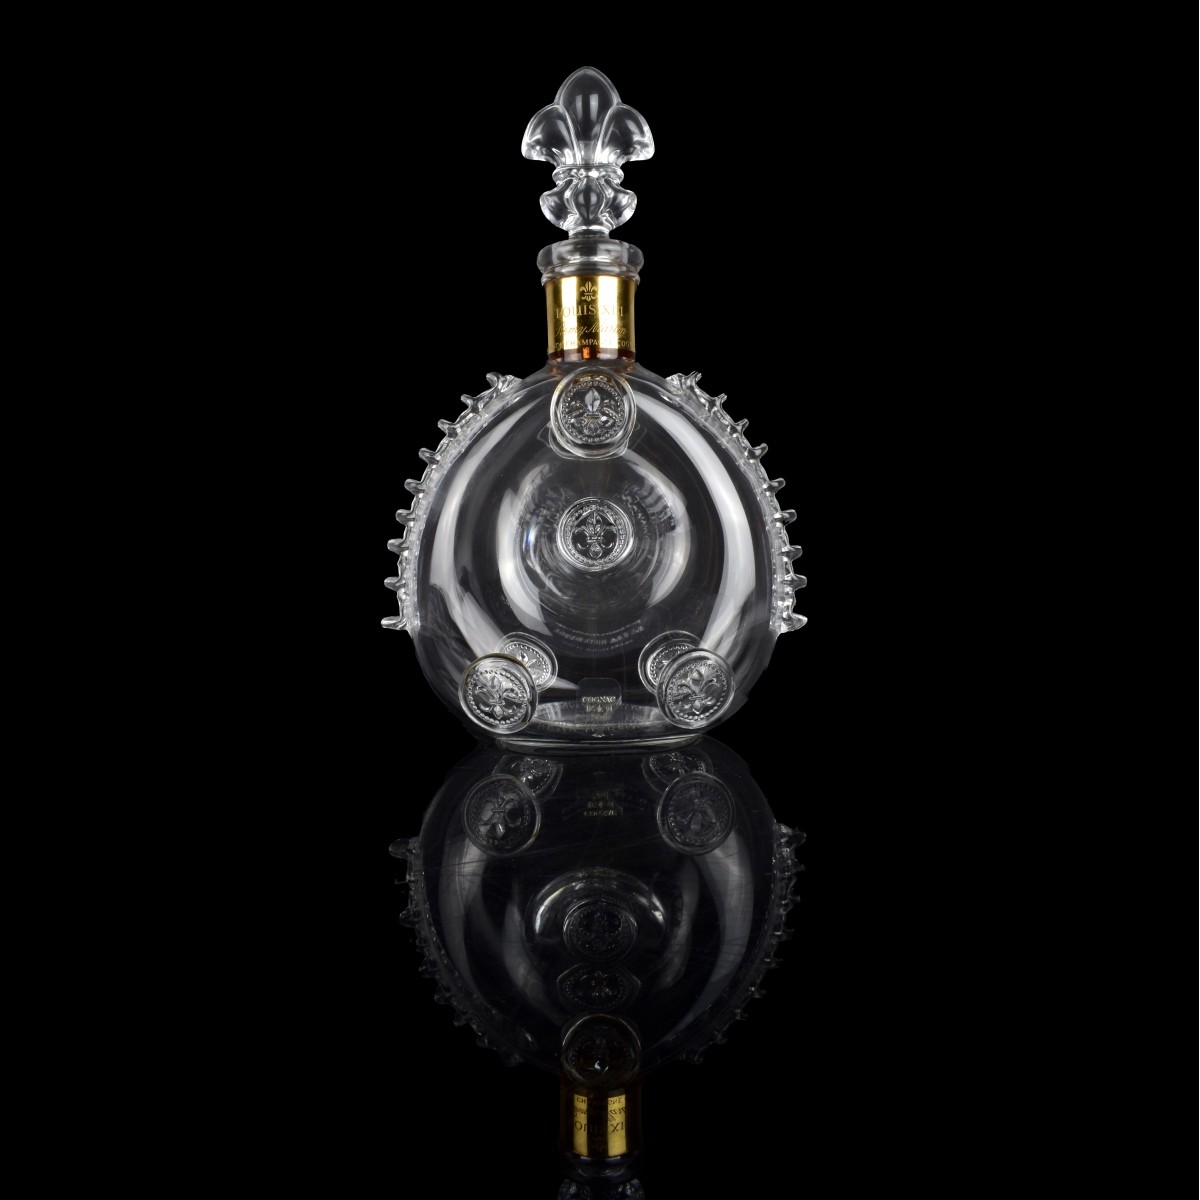 Baccarat Remy Martin Louis XIII Decanter